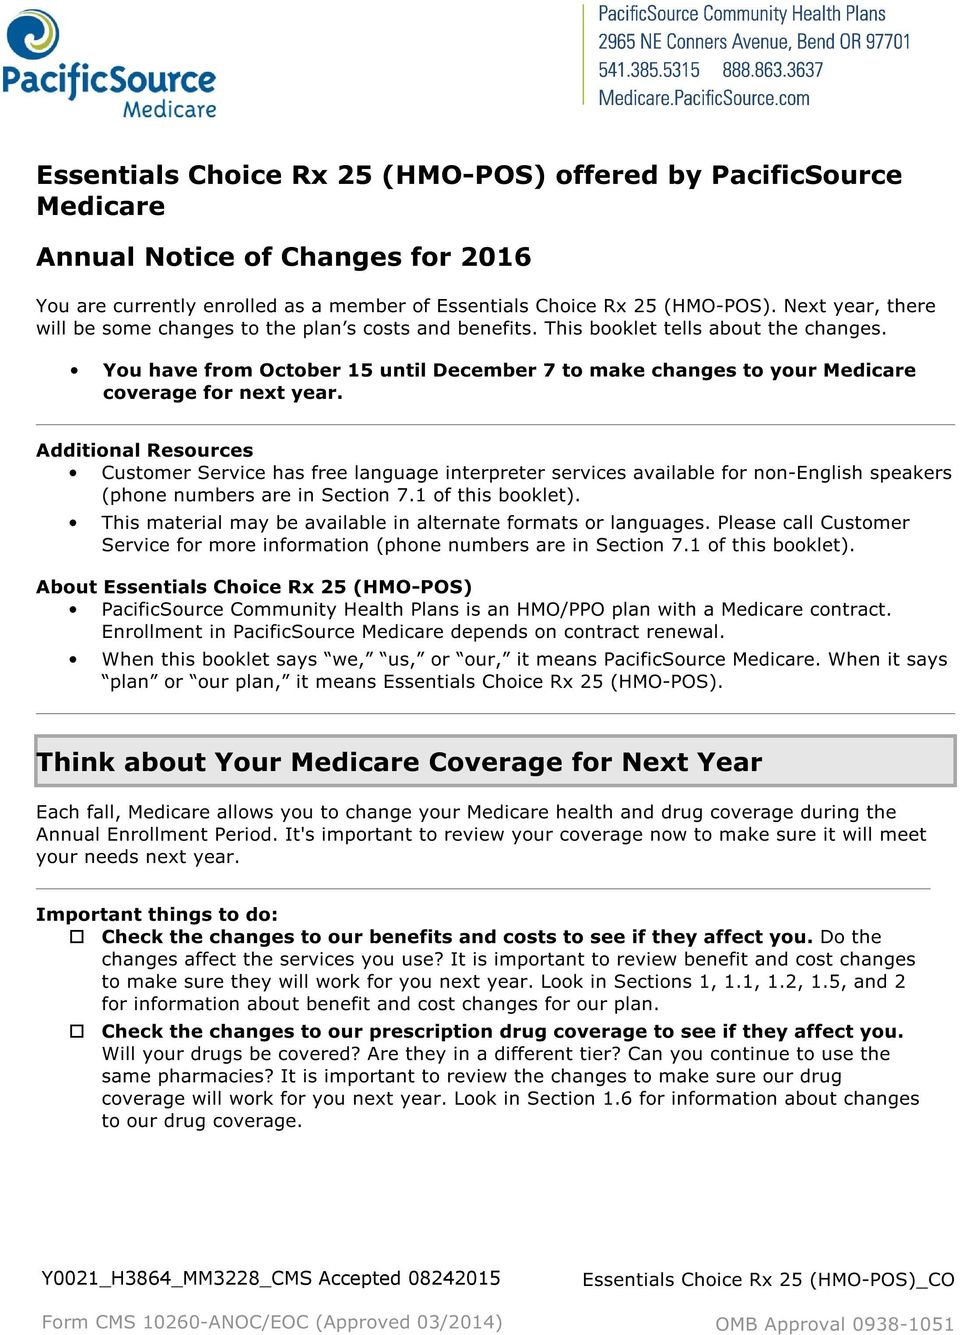 You have from October 15 until December 7 to make changes to your Medicare coverage for next year.